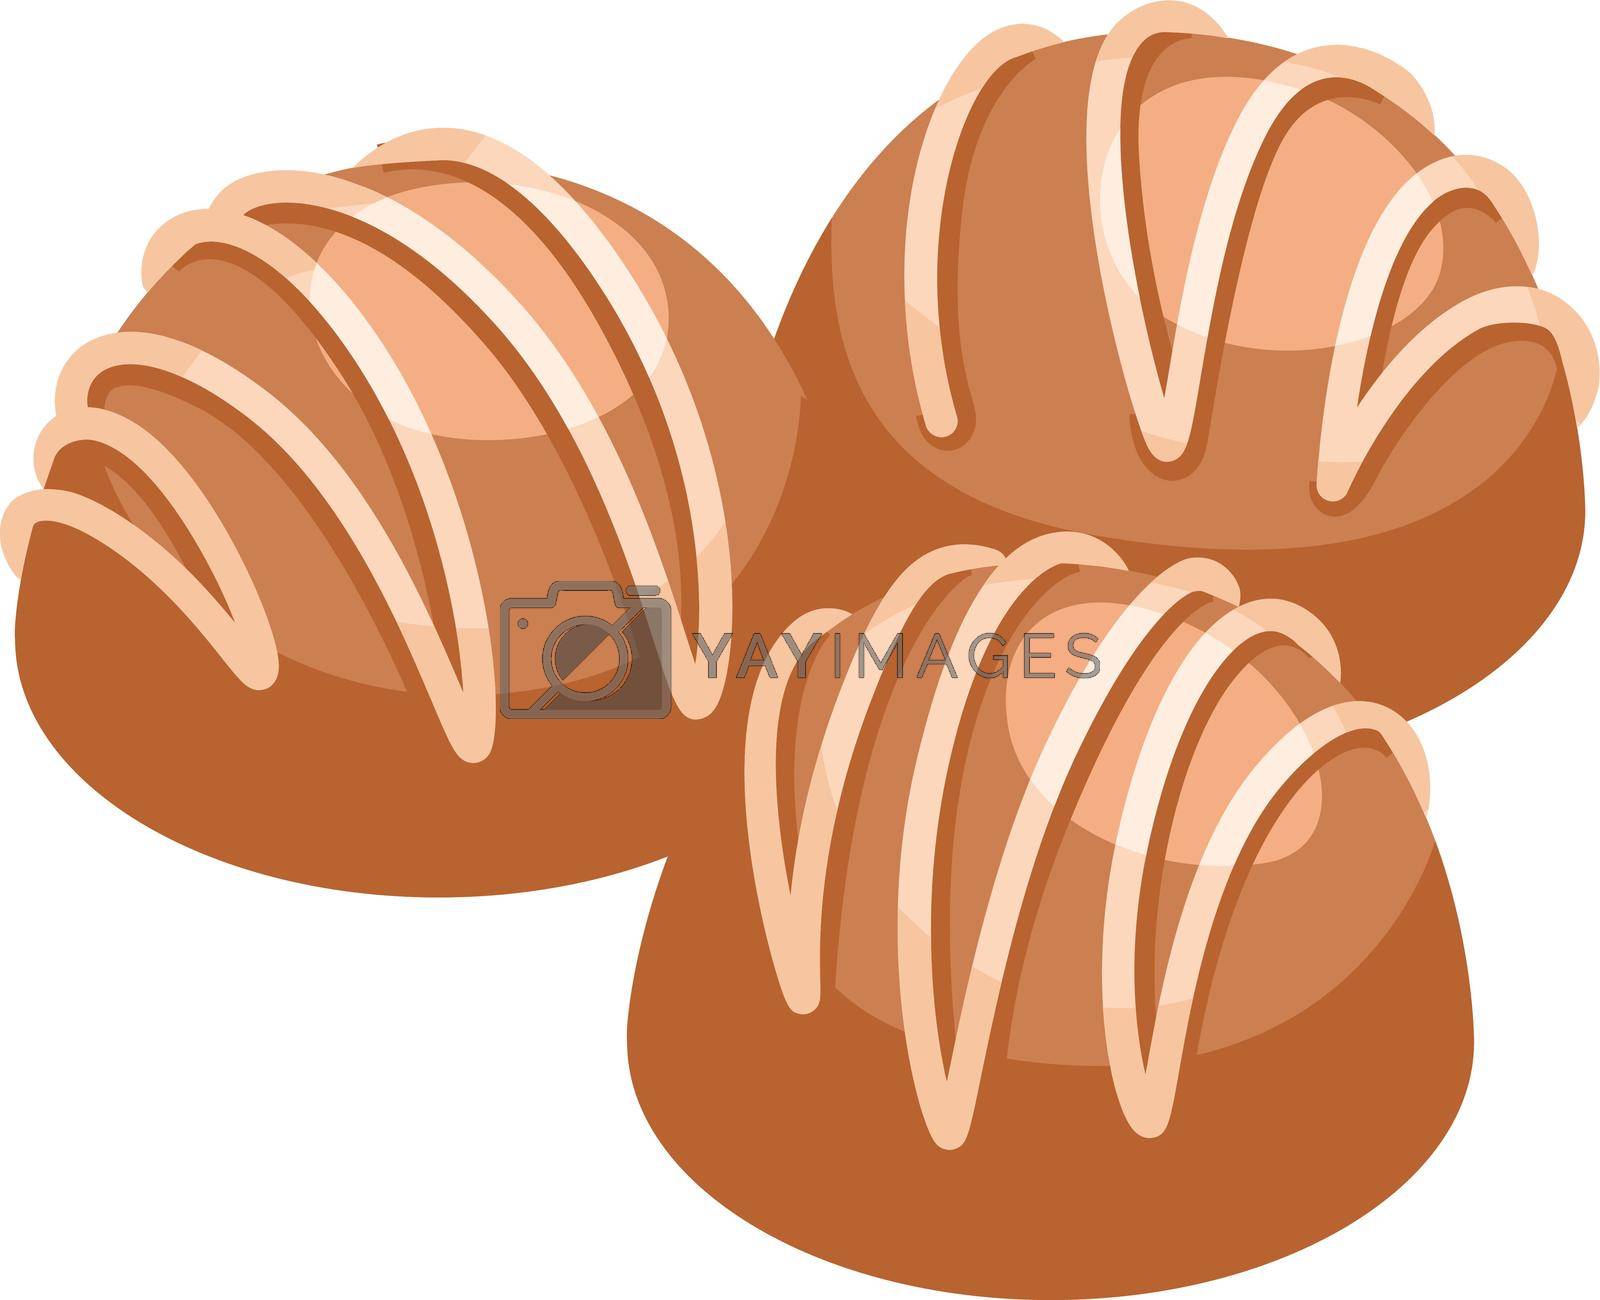 Royalty free image of Round truffle candy. Chocolate bonbon with creamy stripes in cartoon style by LadadikArt